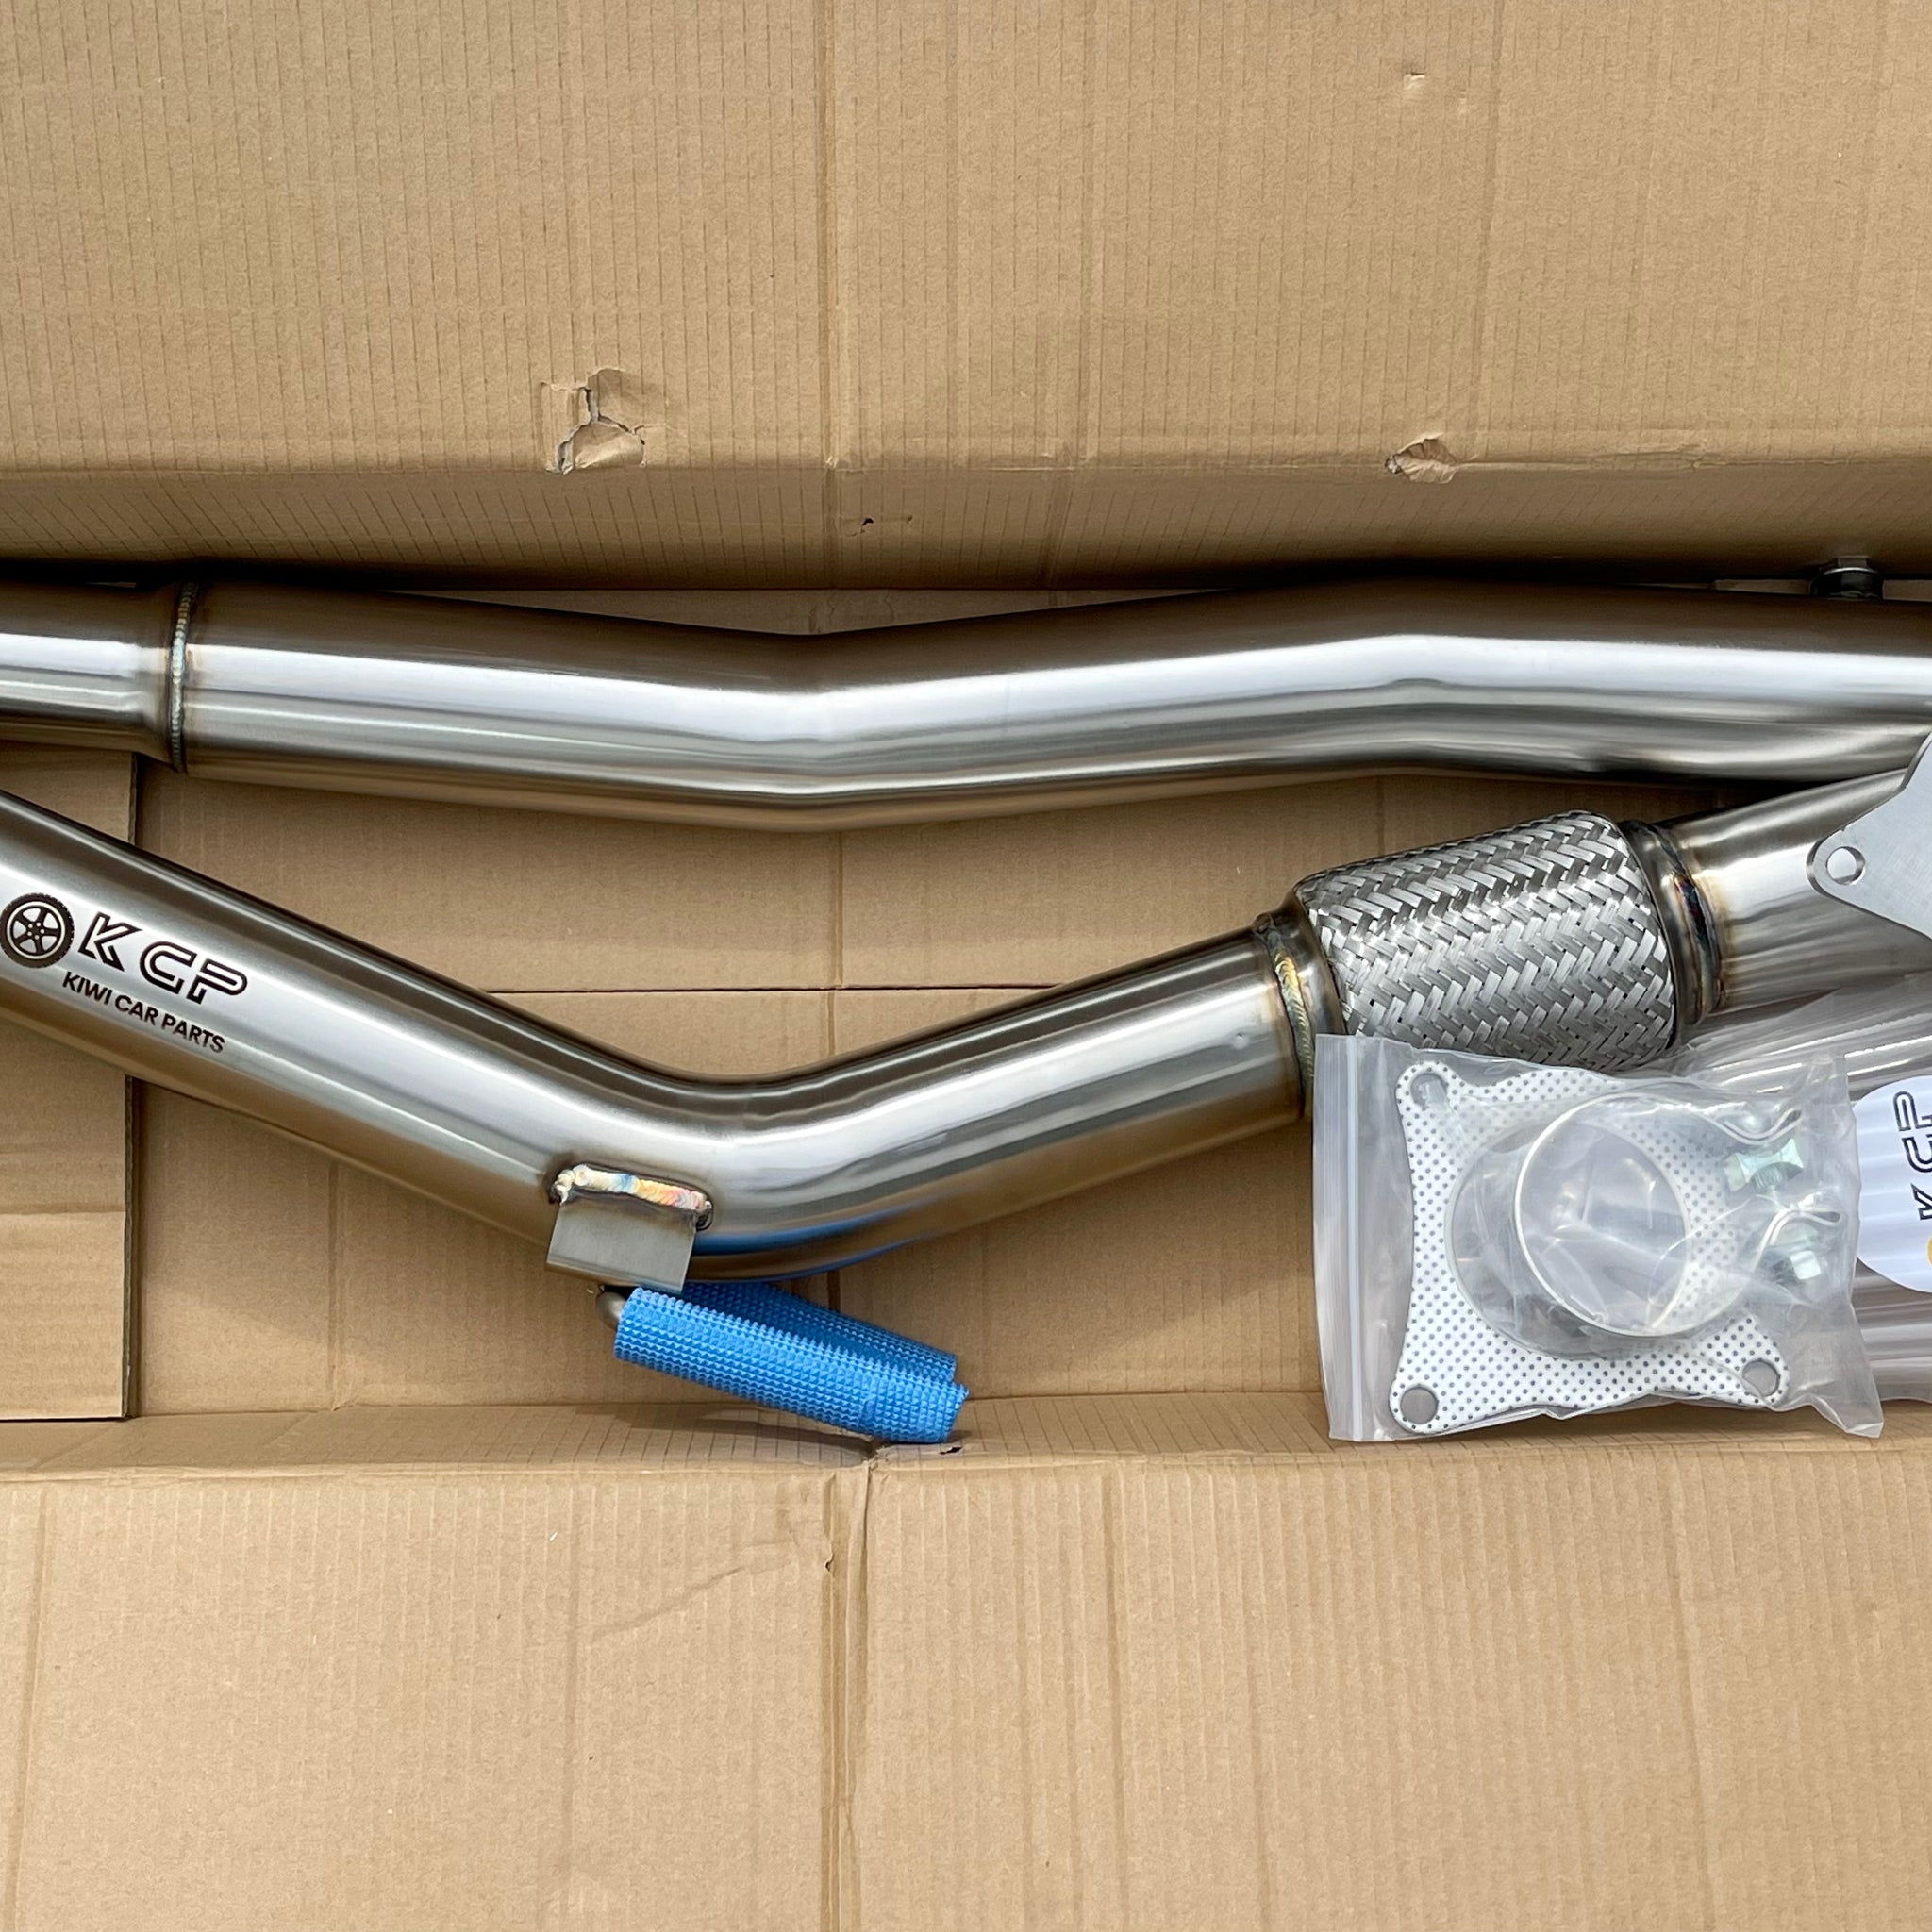 KCP Stainless Decat Downpipe Suit For VW Golf MK5 MK6 GTI Audi A3 8P 2.0T 1.8T Exhaust